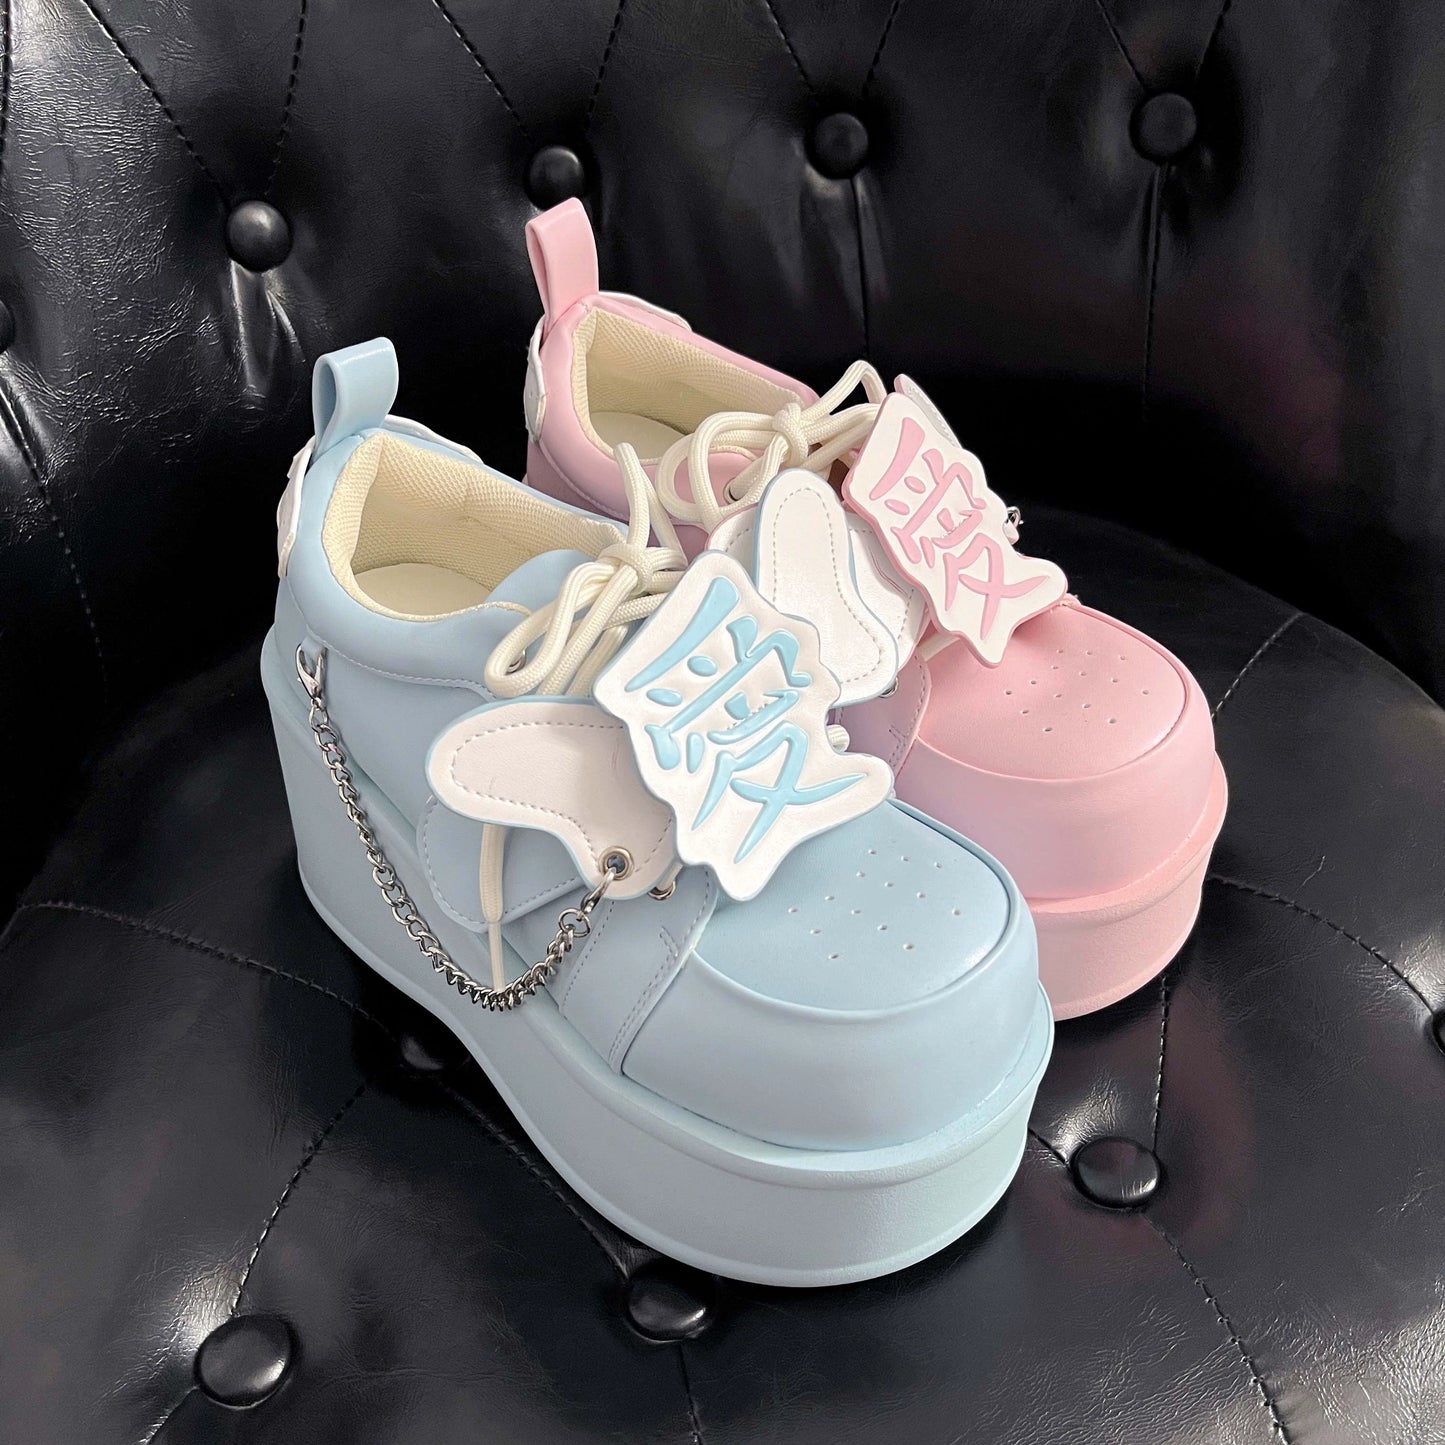 Tenshi Kaiwai Platform Shoes Subculture Thick-soled Shoes 35748:503452 35748:503452